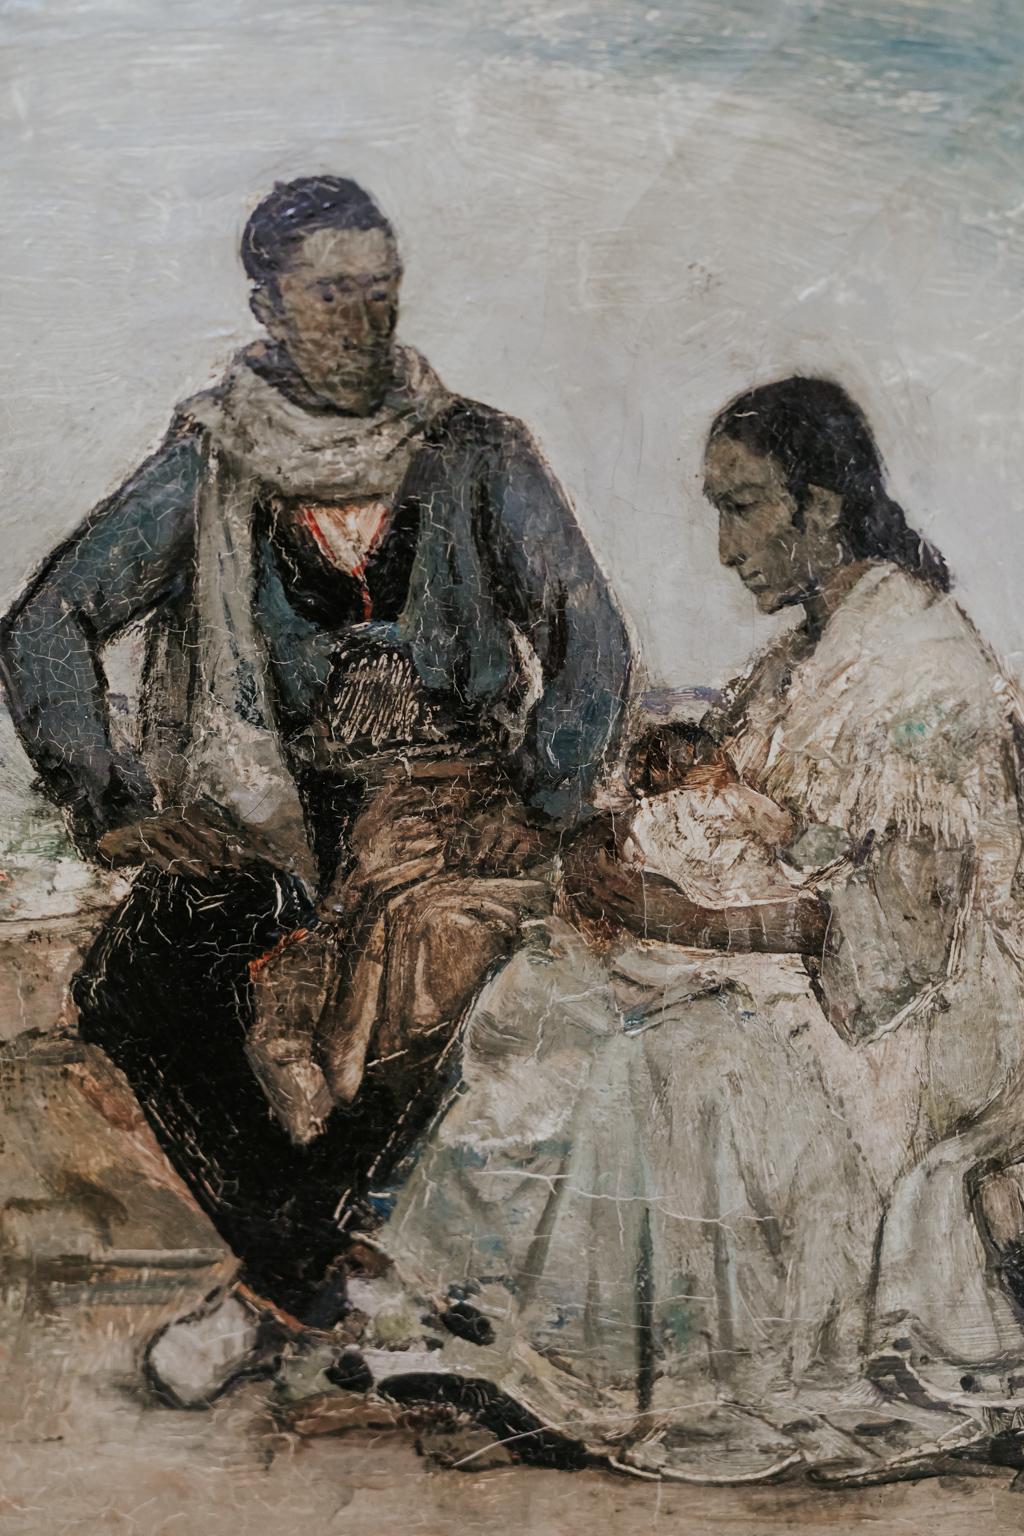 This is a wonderful small painting by Belgian artist Emile Gastemans, 1883-1956, of a gypsy family in Toledo, Spain,
still in its original frame.